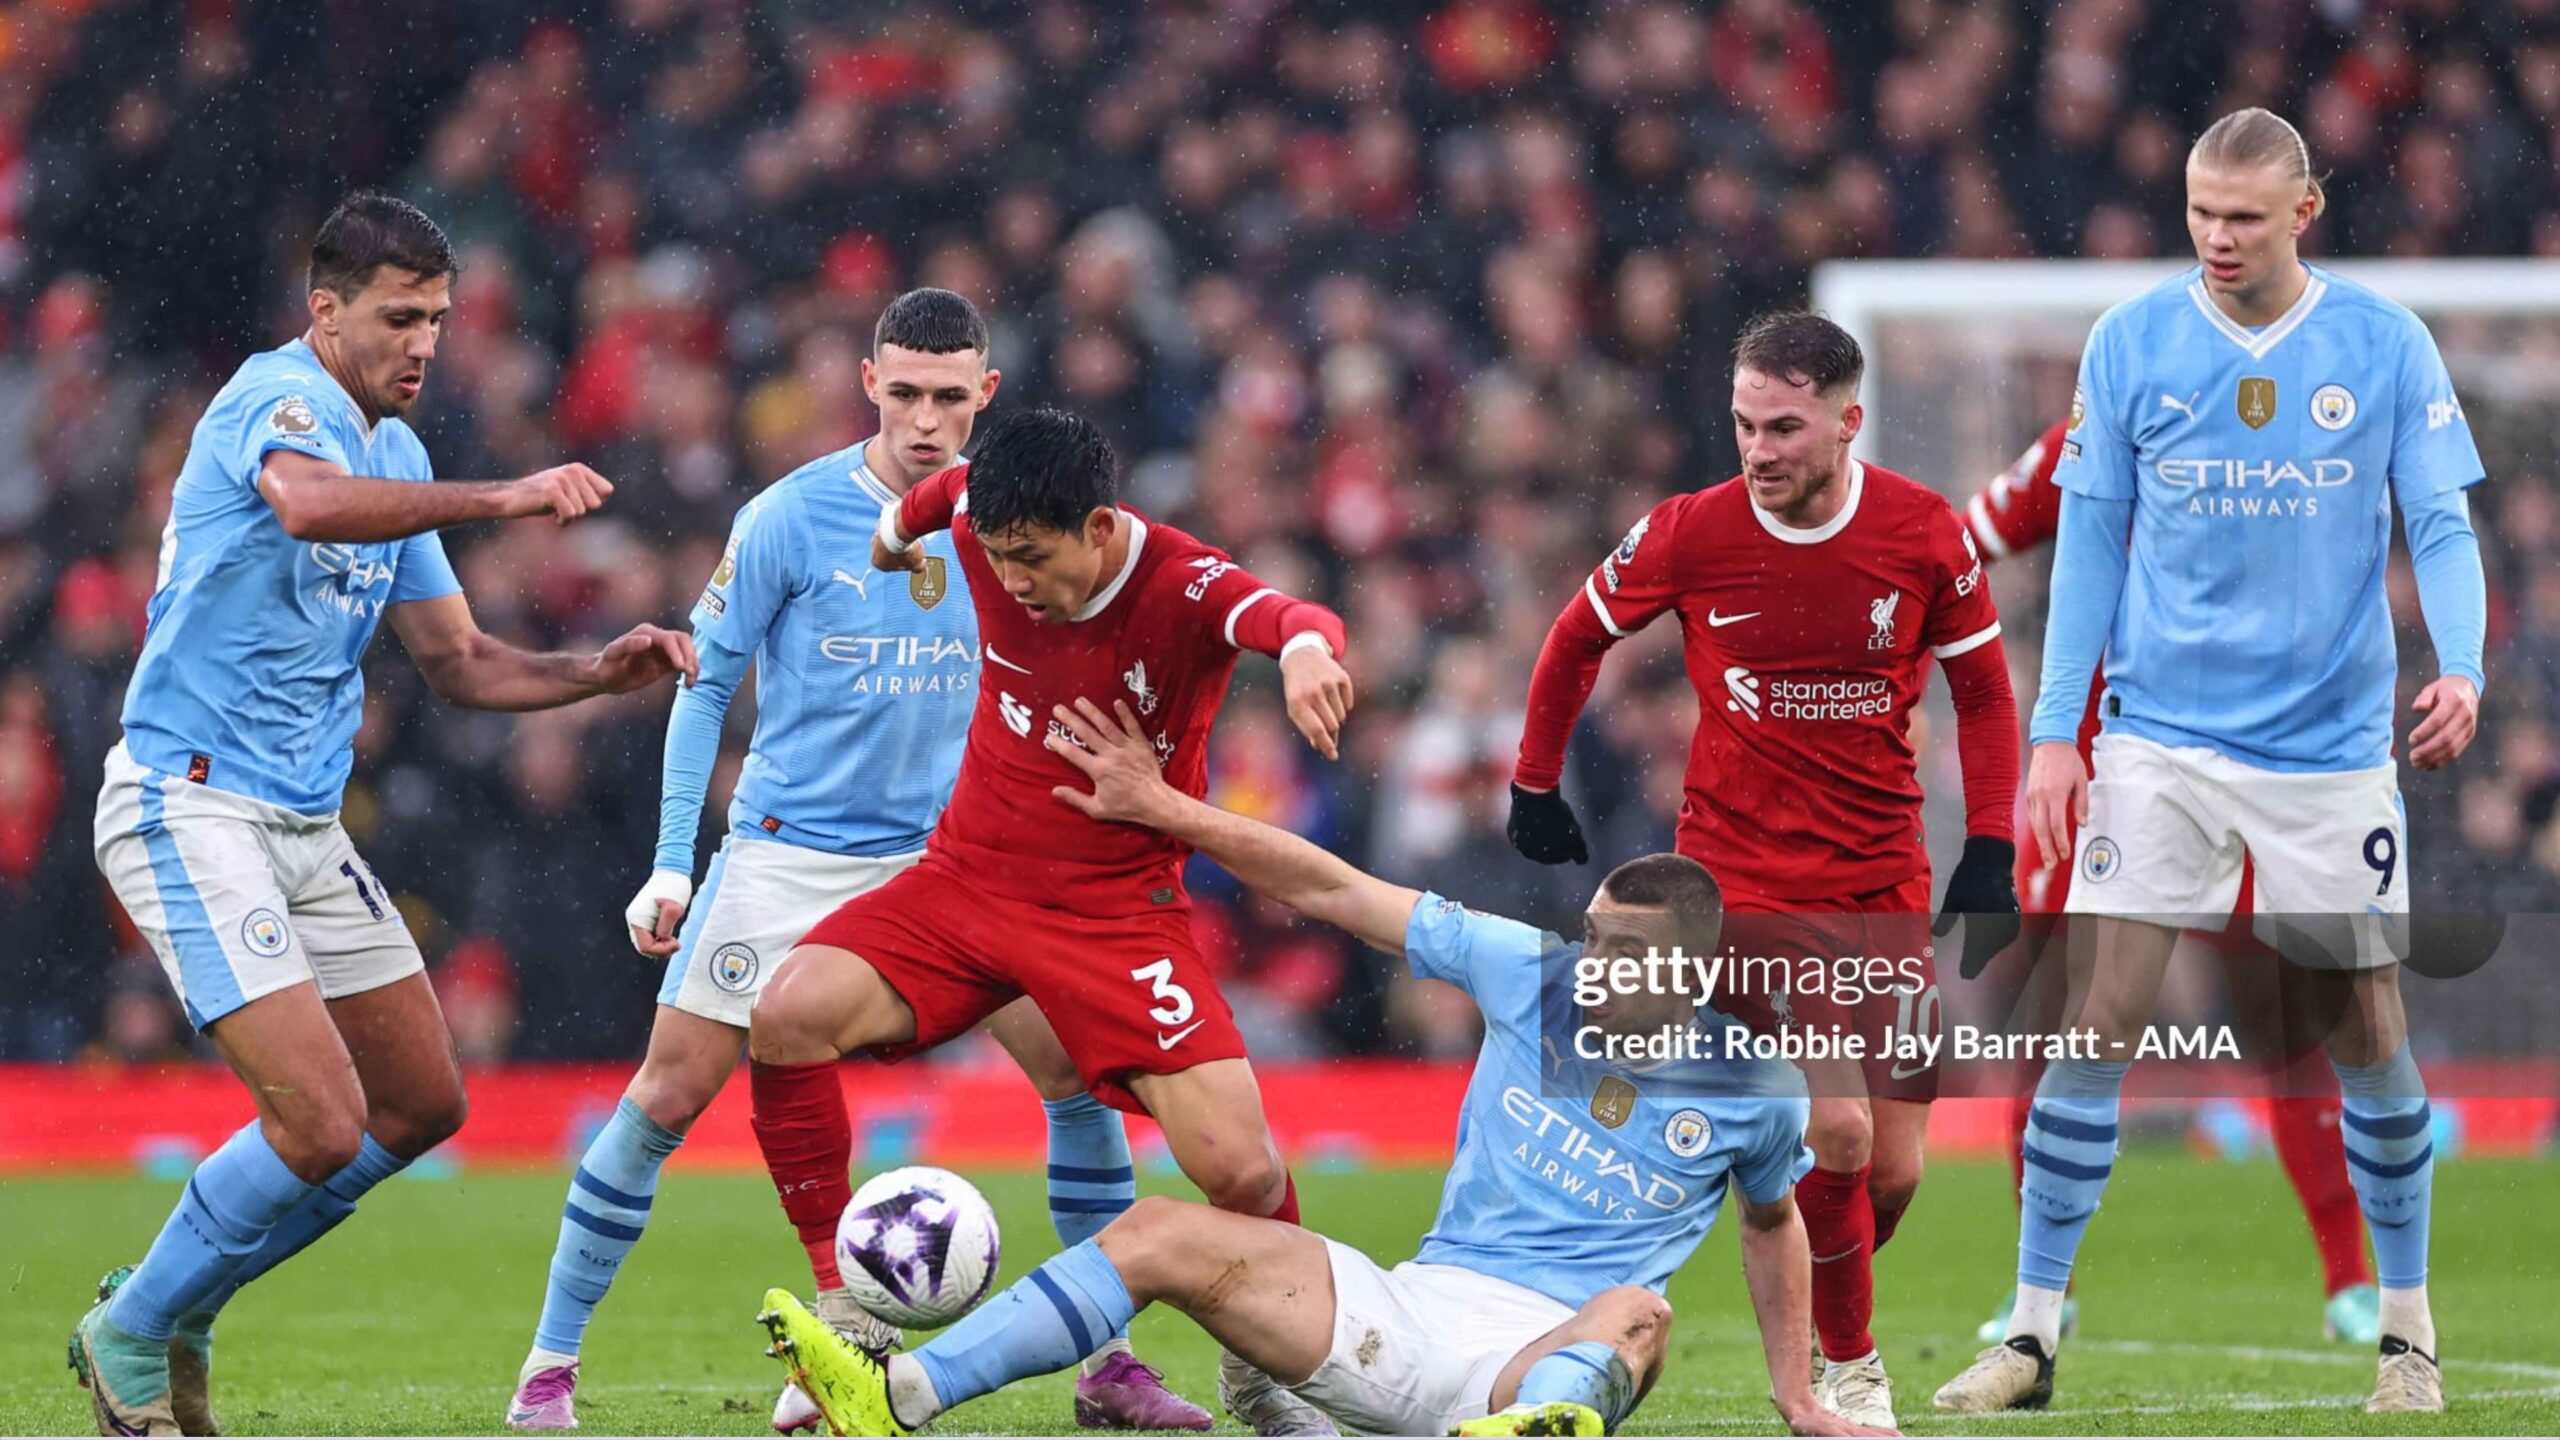 Liverpool and Manchester City players in a tense Premier League match